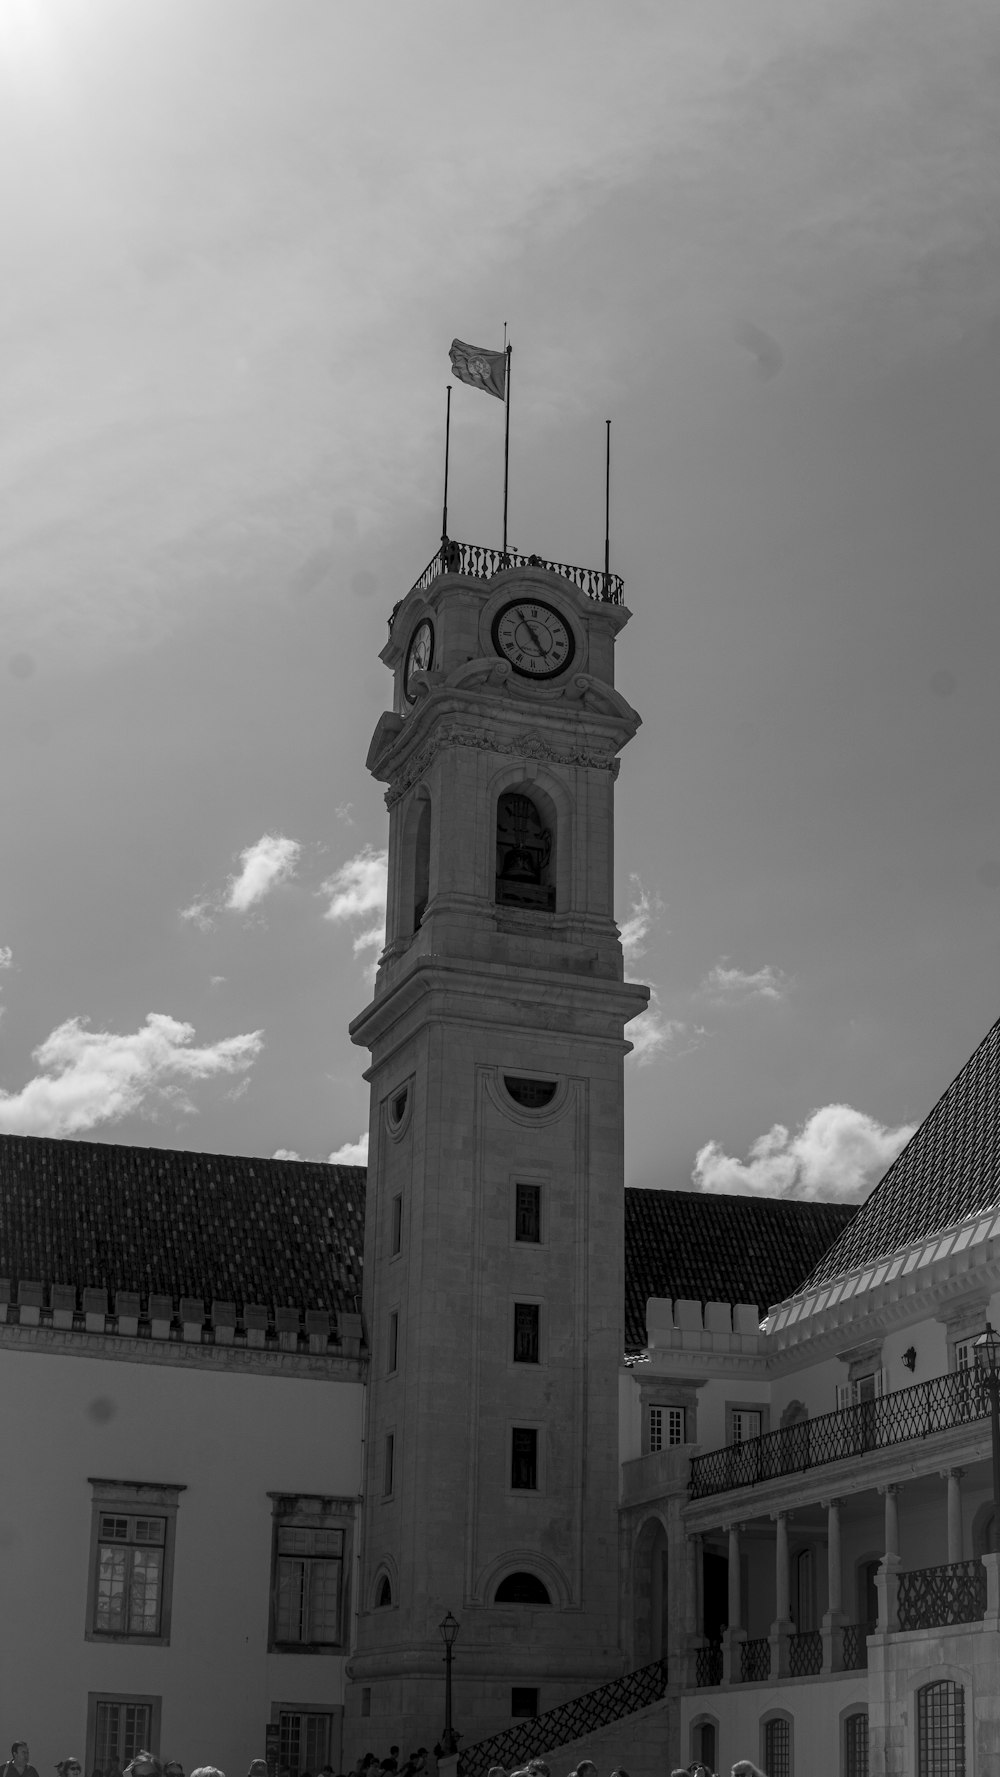 a clock tower with a flag on top of it